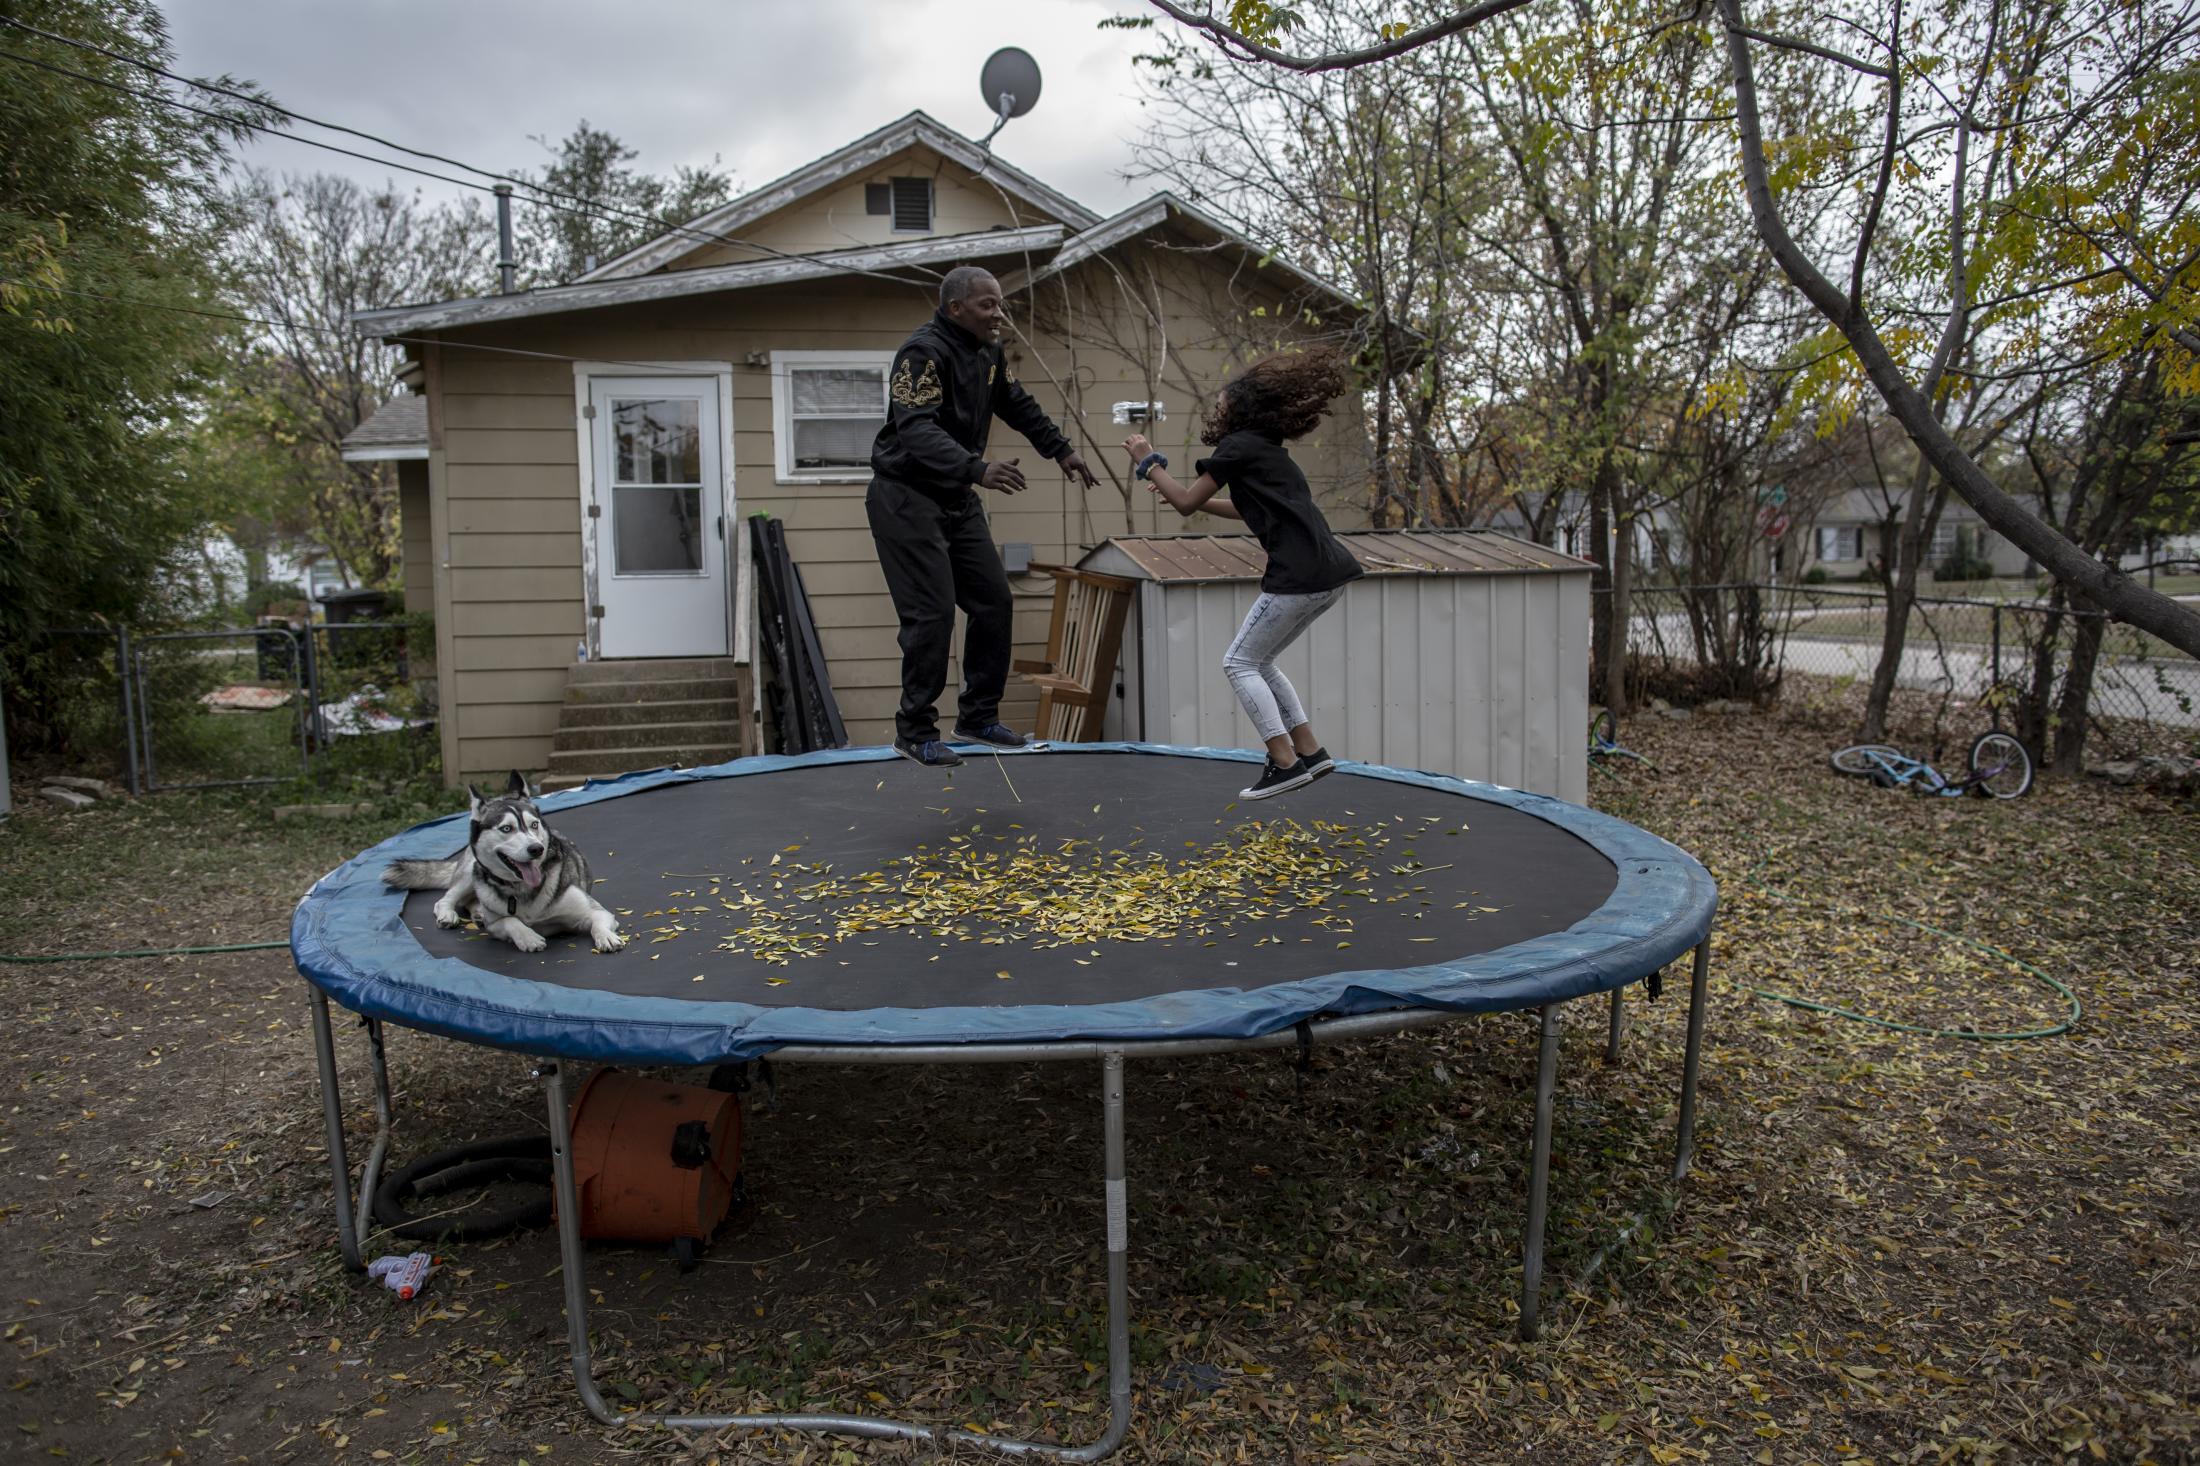 Growing From Tradition - Tony Crawford plays with his family on a trampoline in...